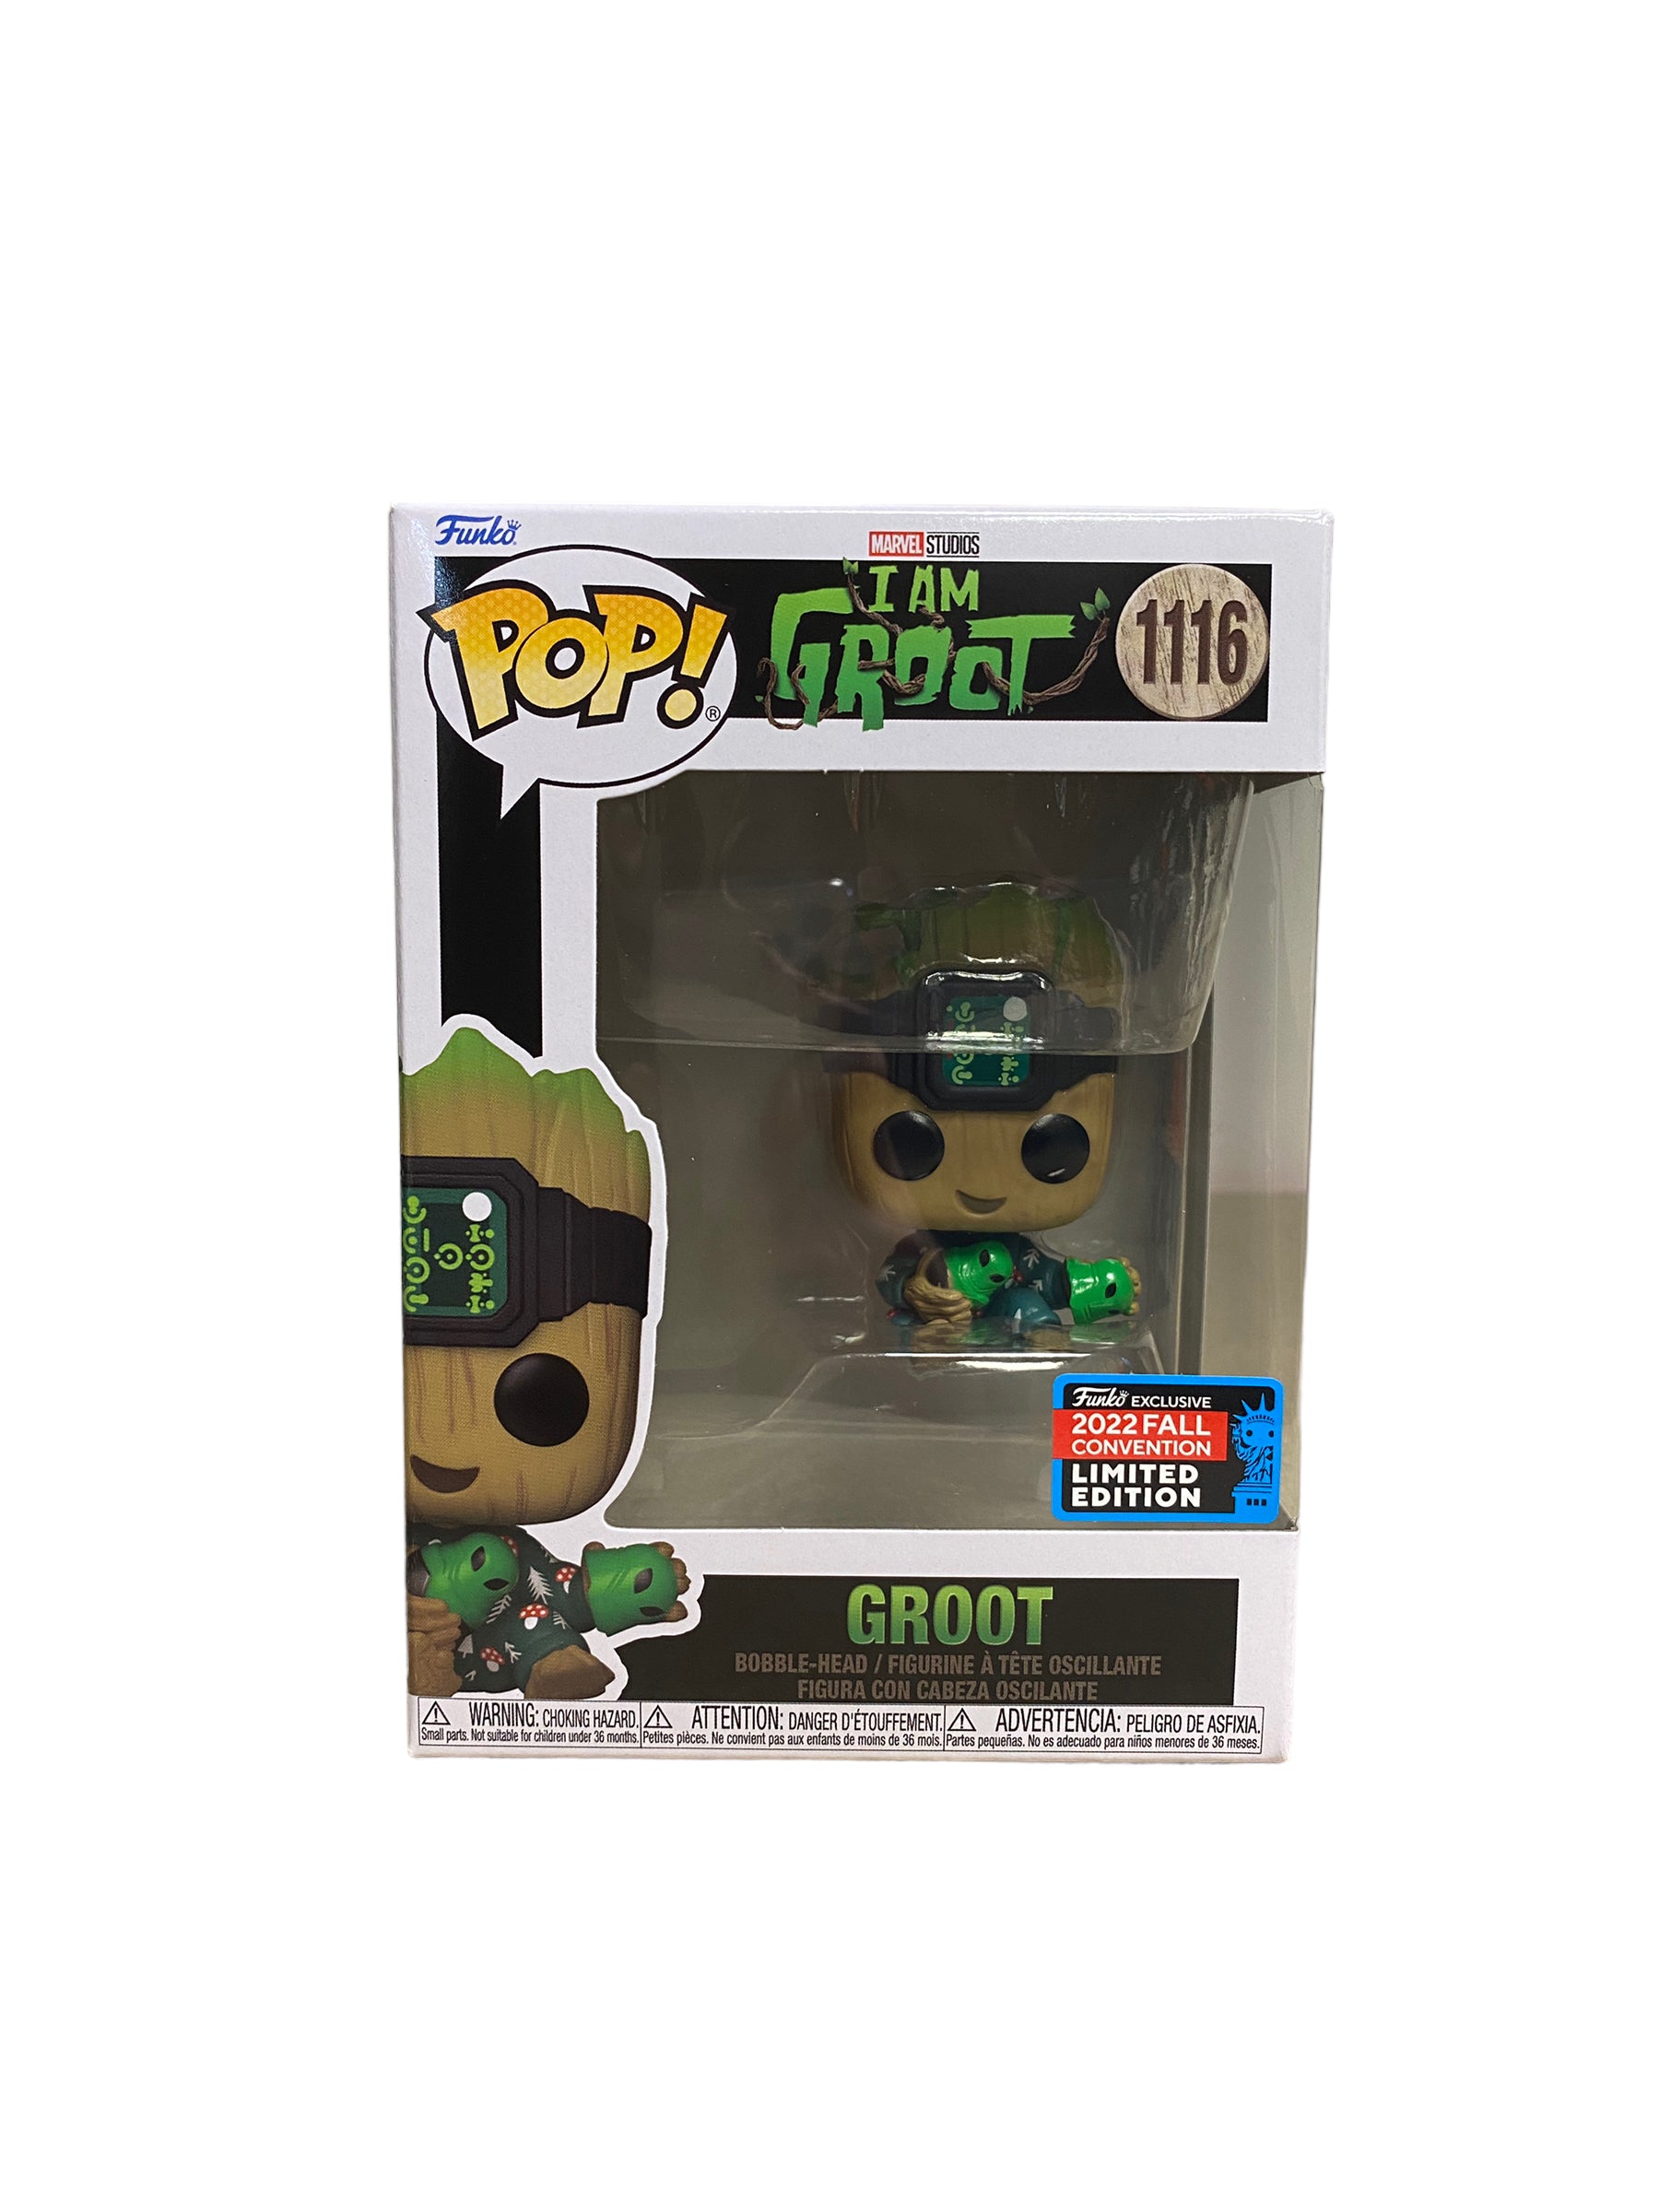 Groot #1116 (w/ Light) Funko Pop! - I Am Groot - NYCC 2022 Shared Exclusive - Condition 9.5/10